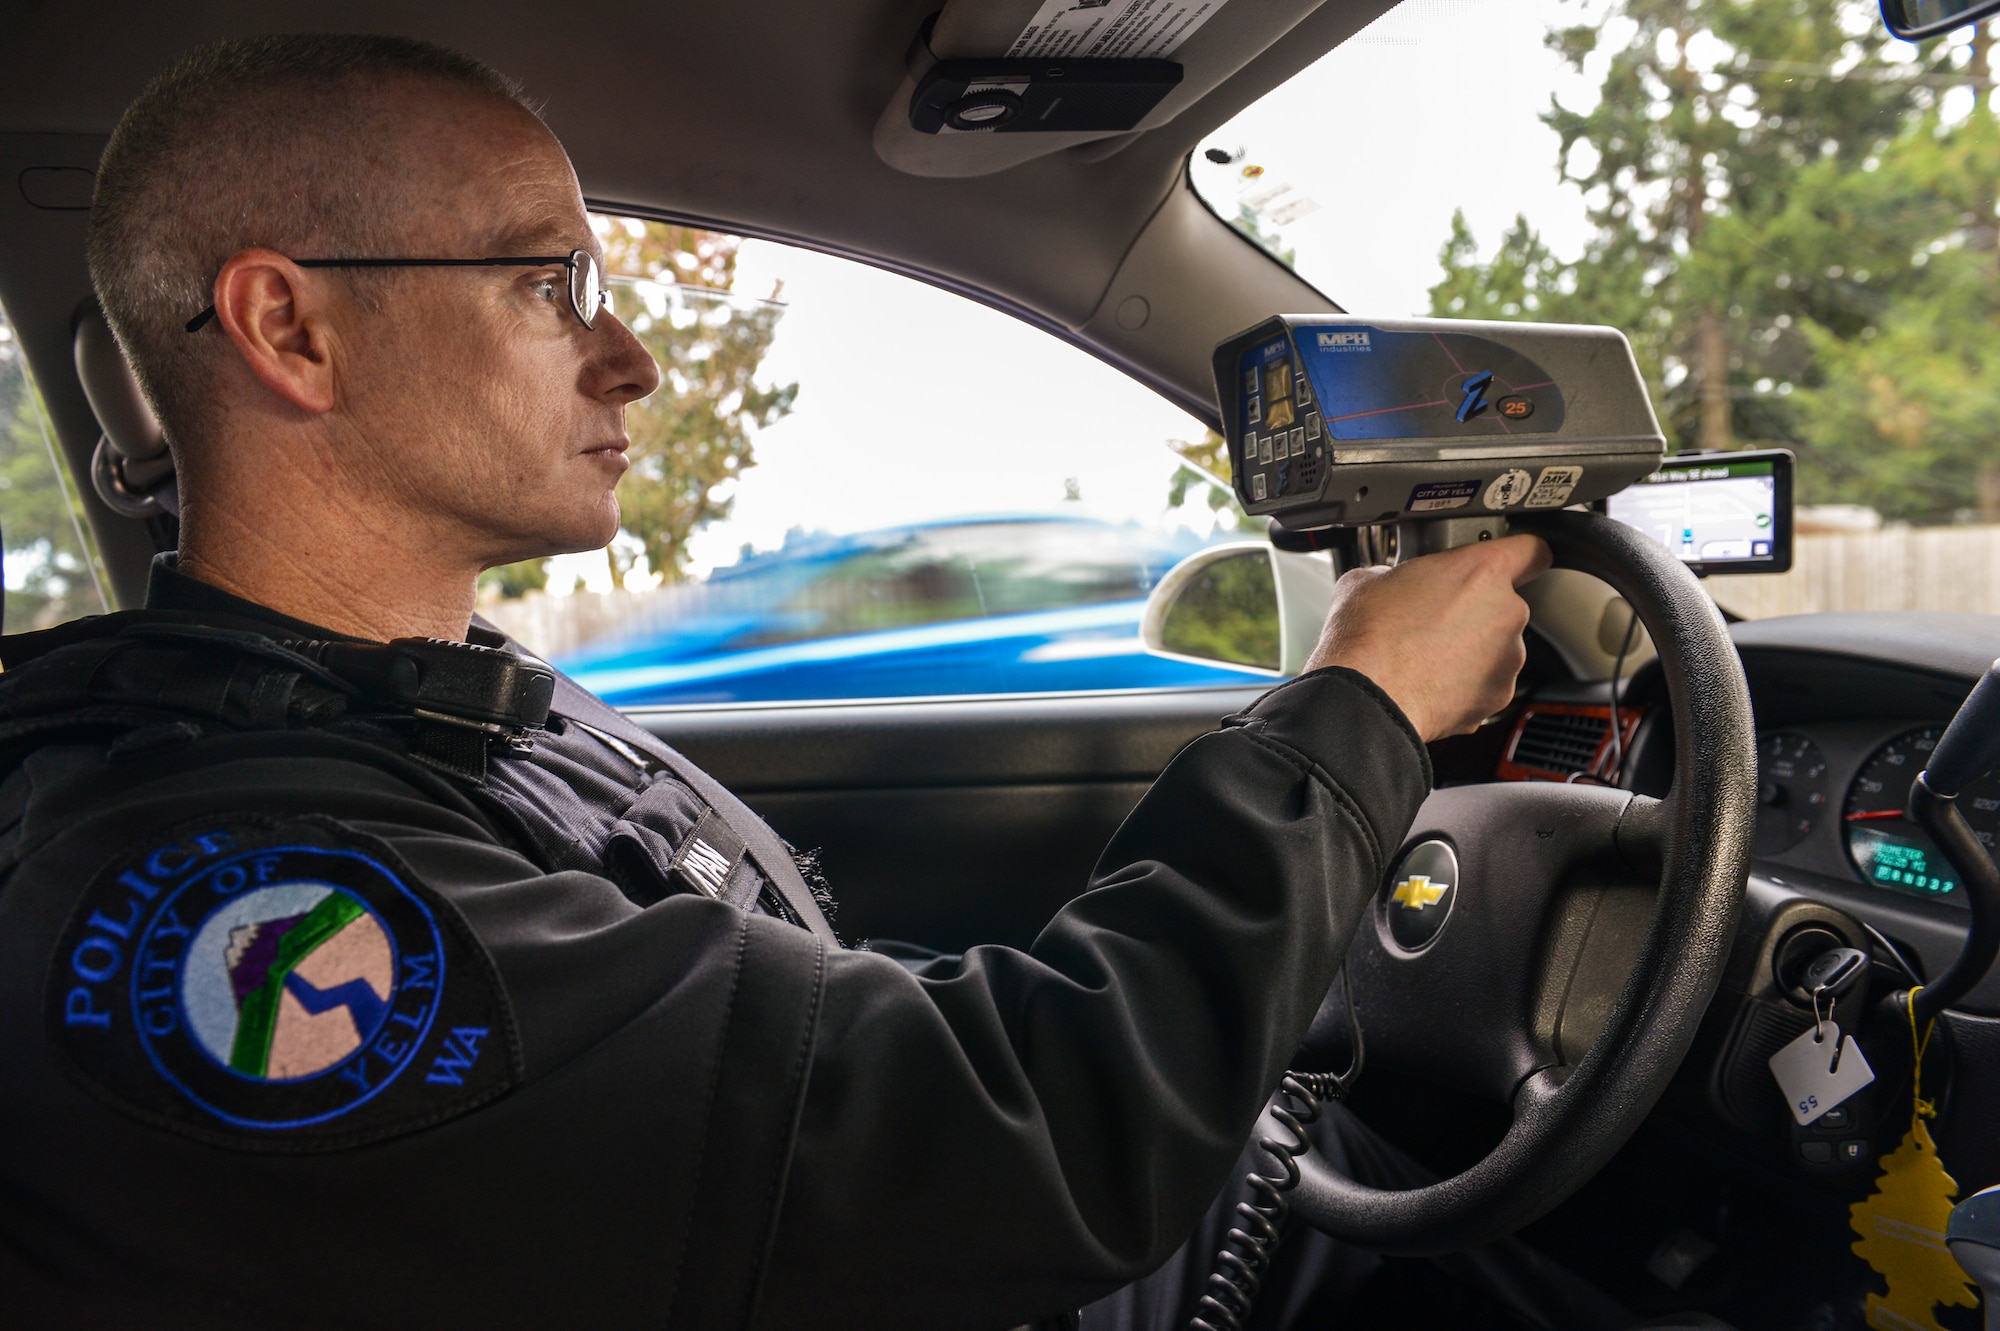 Master Sgt. Phil Ryan, 62nd Airlift Wing Inspector General complaint resolution superintendent, also a reserve police officer at the Yelm Police Department, monitors drivers' speed with a radar detector, Dec. 14, 2013, in Yelm, Wash. Ryan has more approximately 800 hours experience as a volunteer police officer. (U.S. Air Force photo/Tech. Sgt. Sean Tobin)